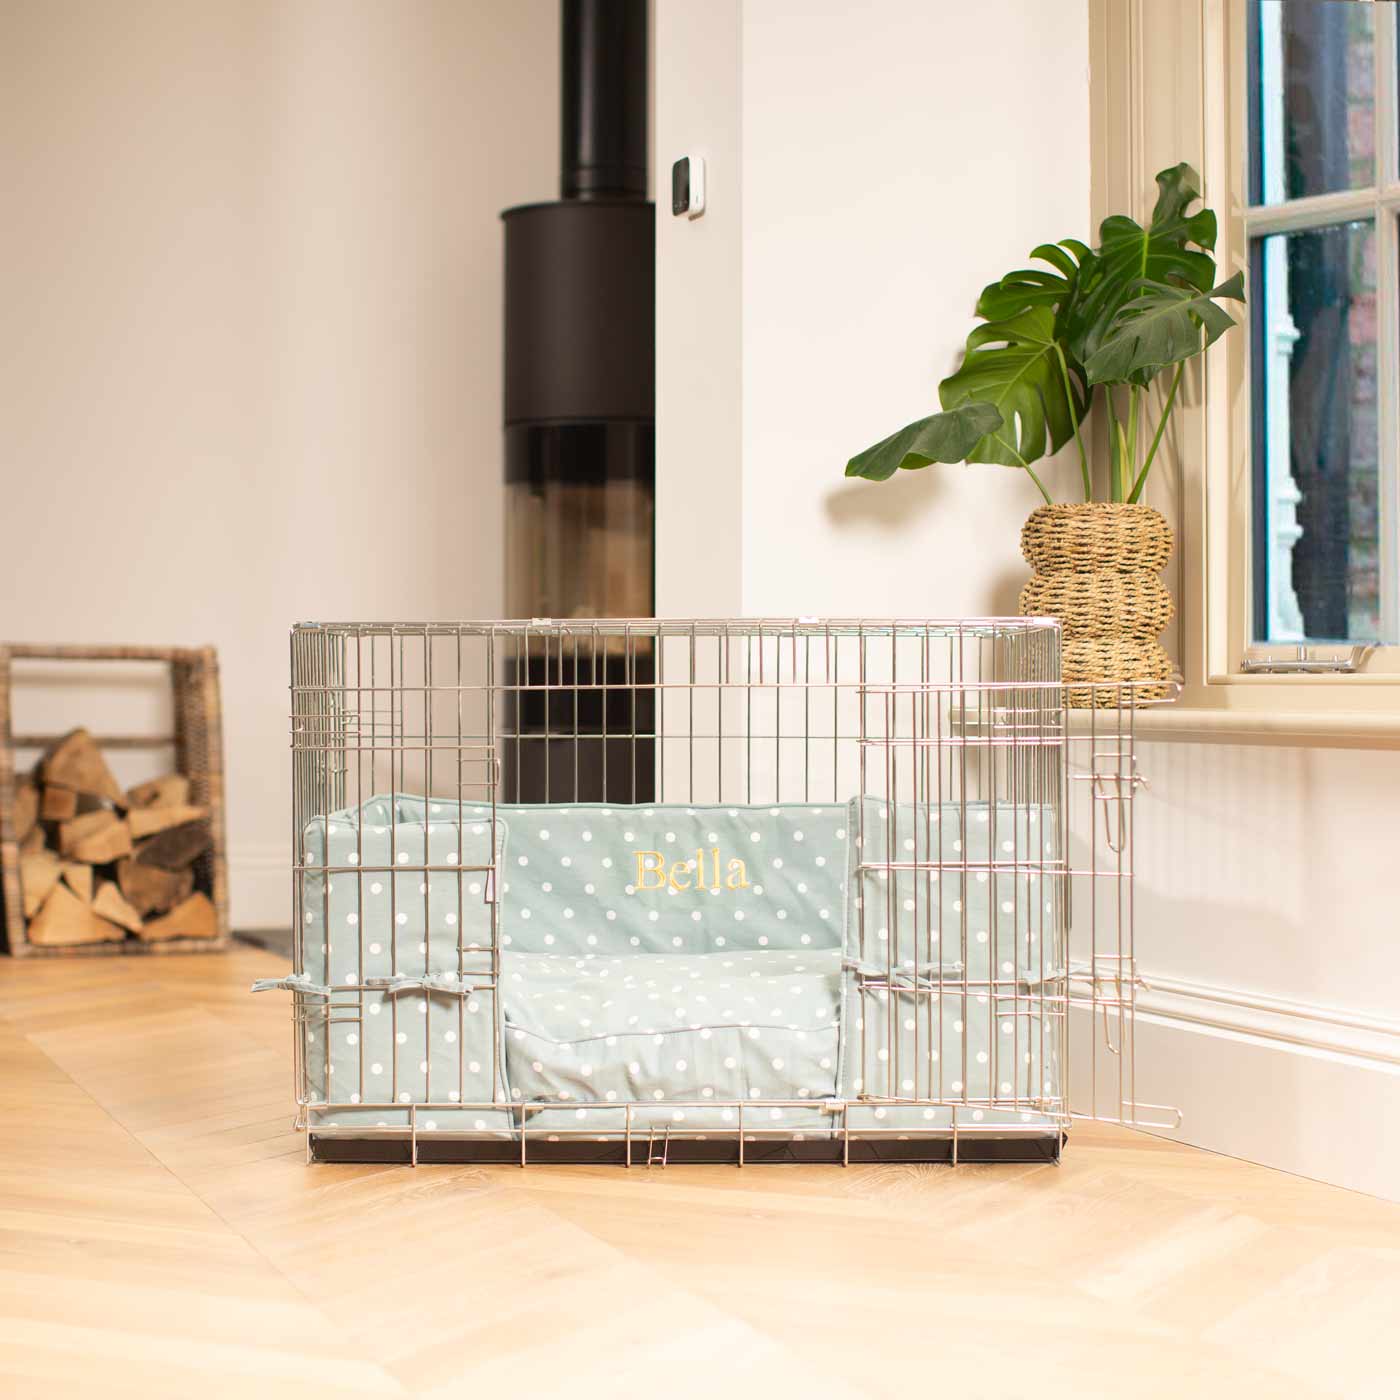 Luxury Gold Dog Cage Set With Bumper, The Perfect Dog Crate For The Ultimate Naptime, Available Now at Lords & Labradors US